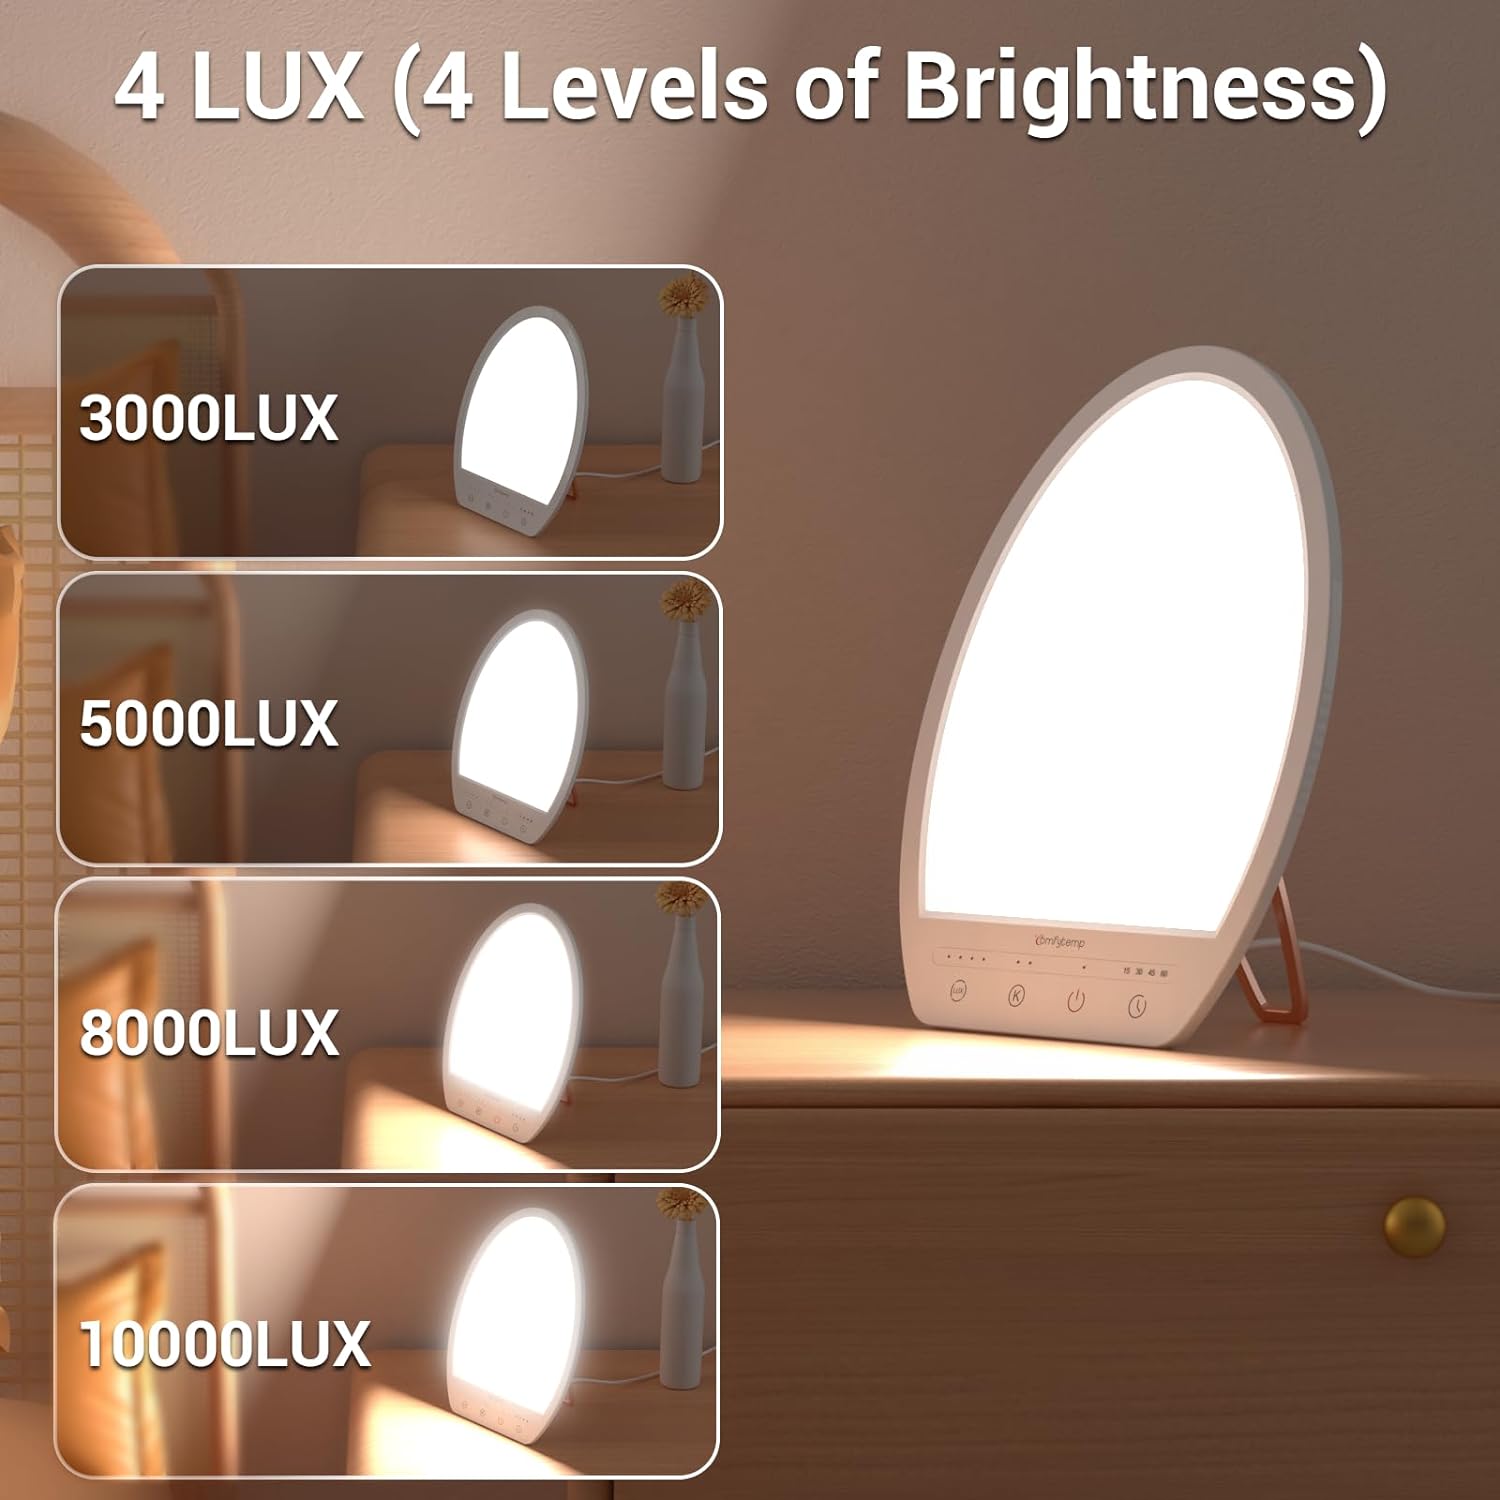 Comfytemp Light Therapy Lamp, 10,000 Lux Full Spectrum Light Therapy Lamp